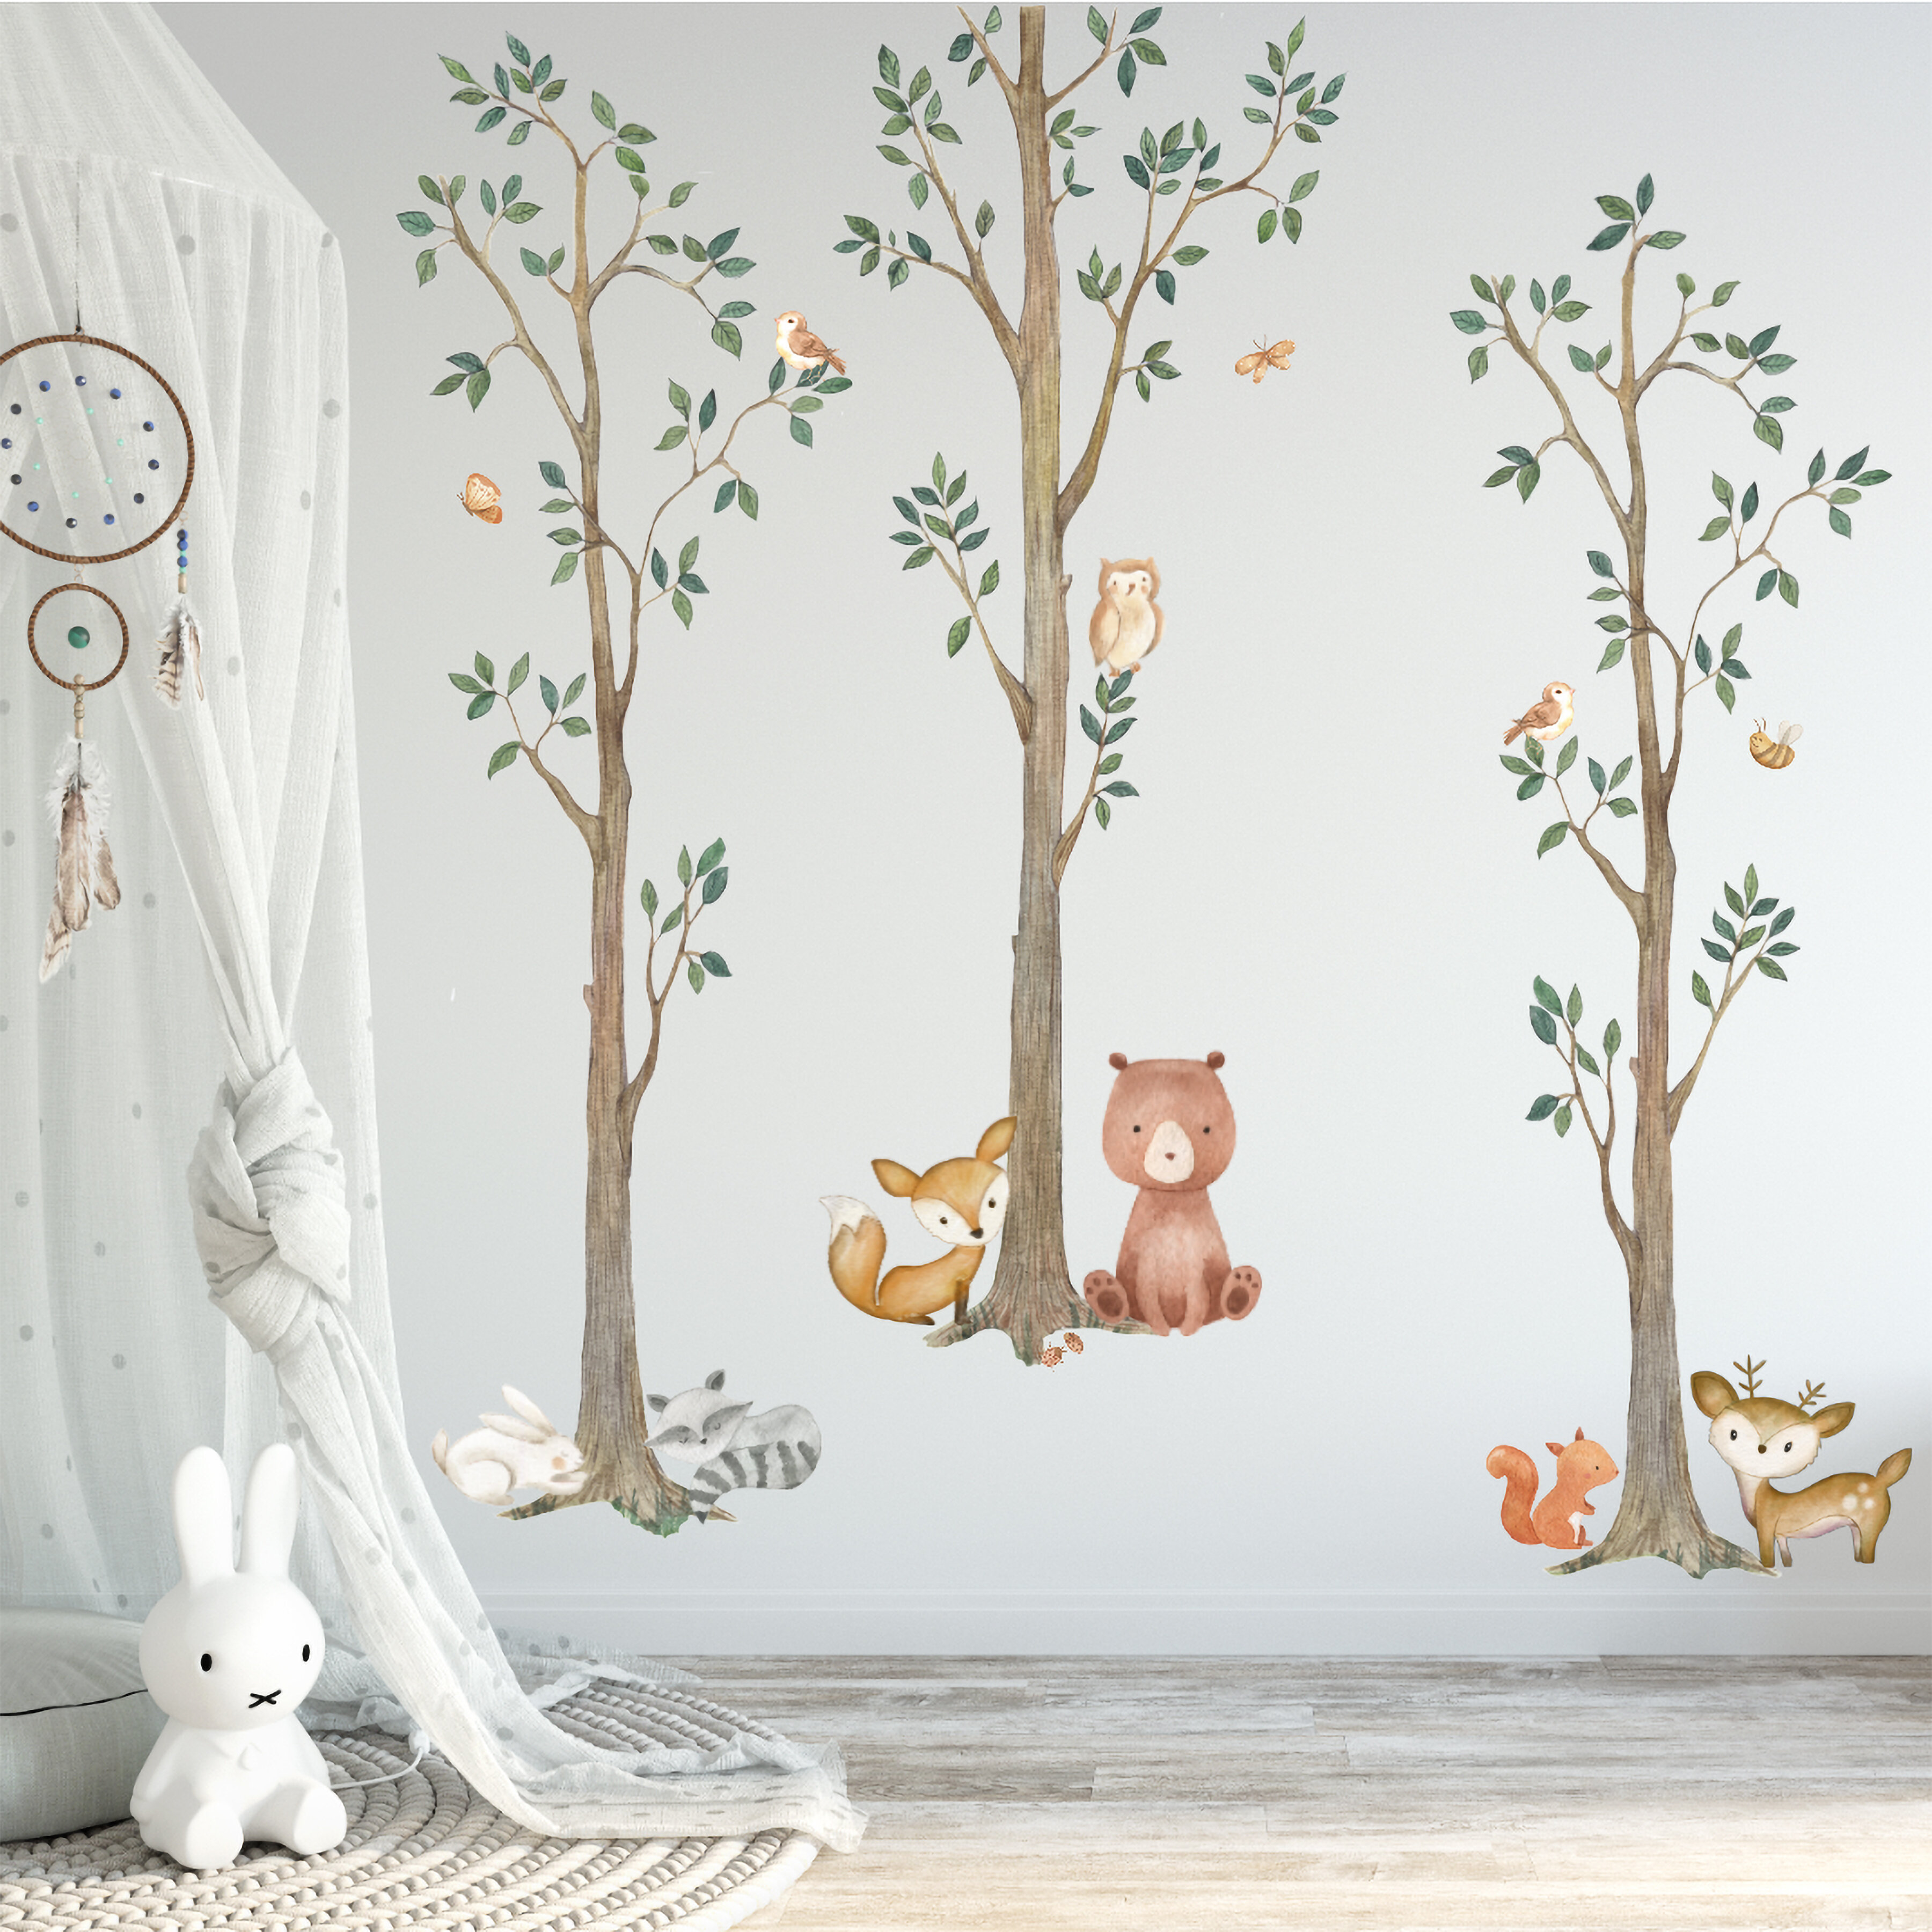 Owl Squirrel Tree Removable Wall Stickers Vinyl Decal Kids Nursery Room Decor 